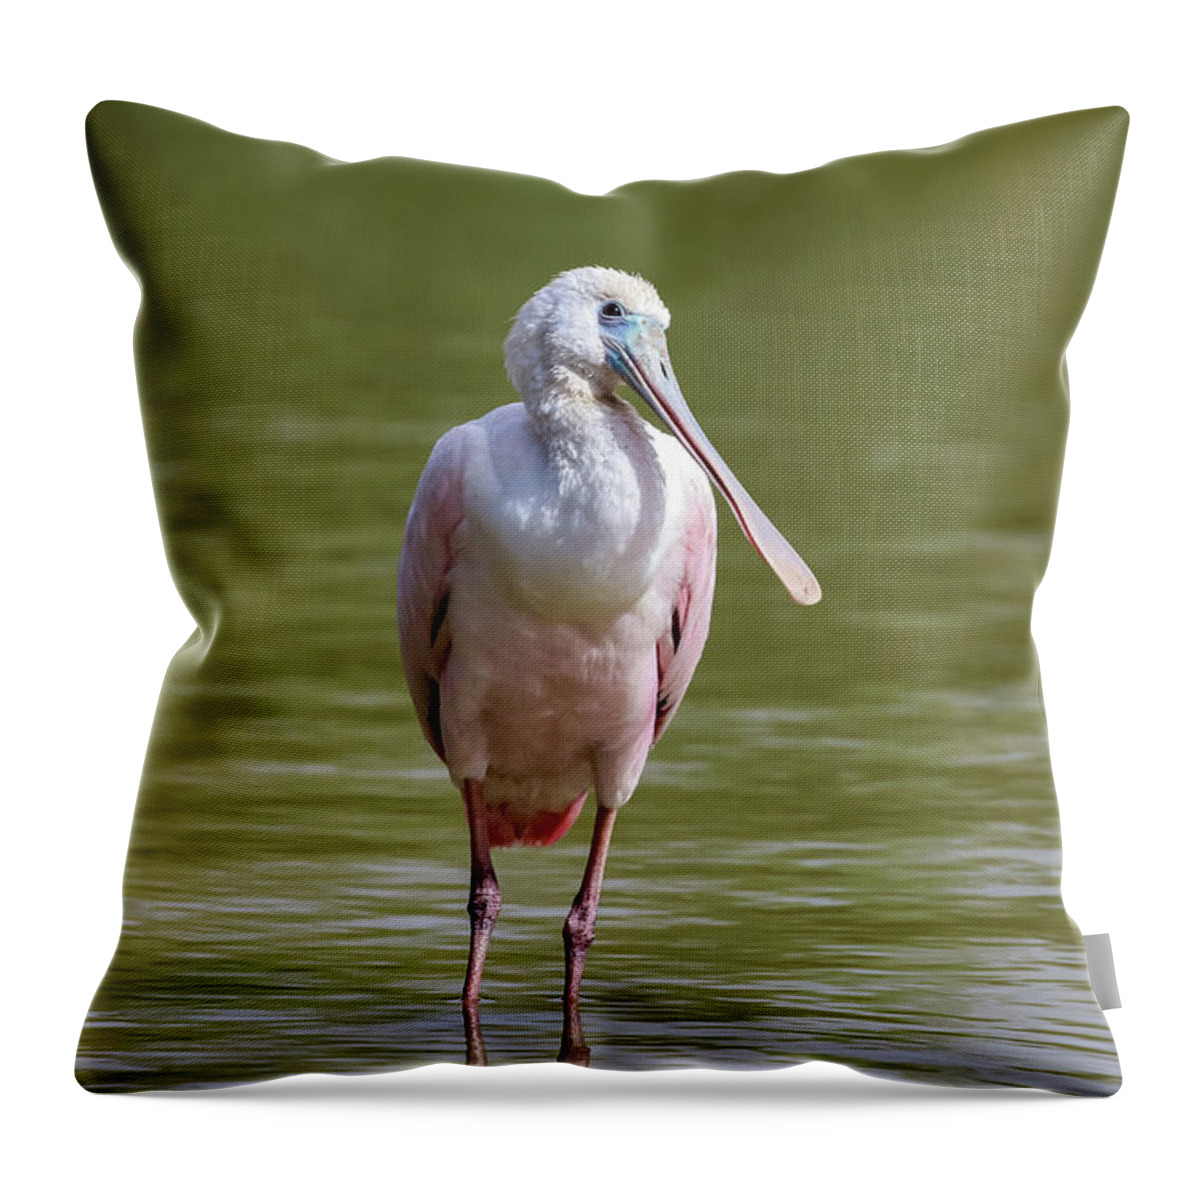 2020 Throw Pillow featuring the photograph Roseate Spoonbill Close Up by Dawn Richards